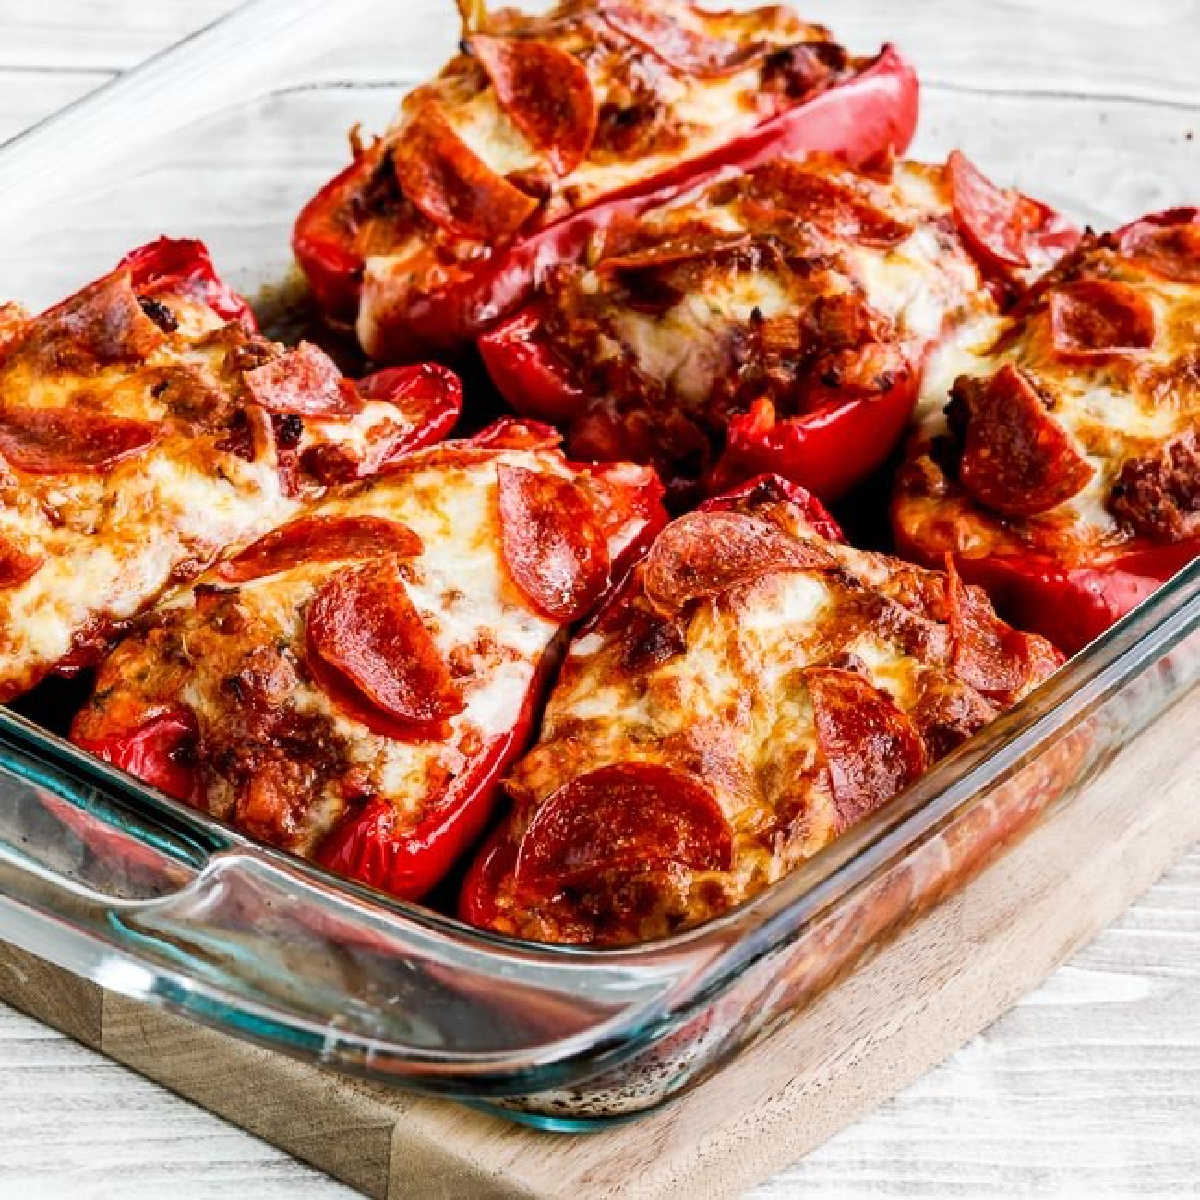 Square image of Sausage and Pepperoni Pizza-Stuffed Peppers shown in baking dish.